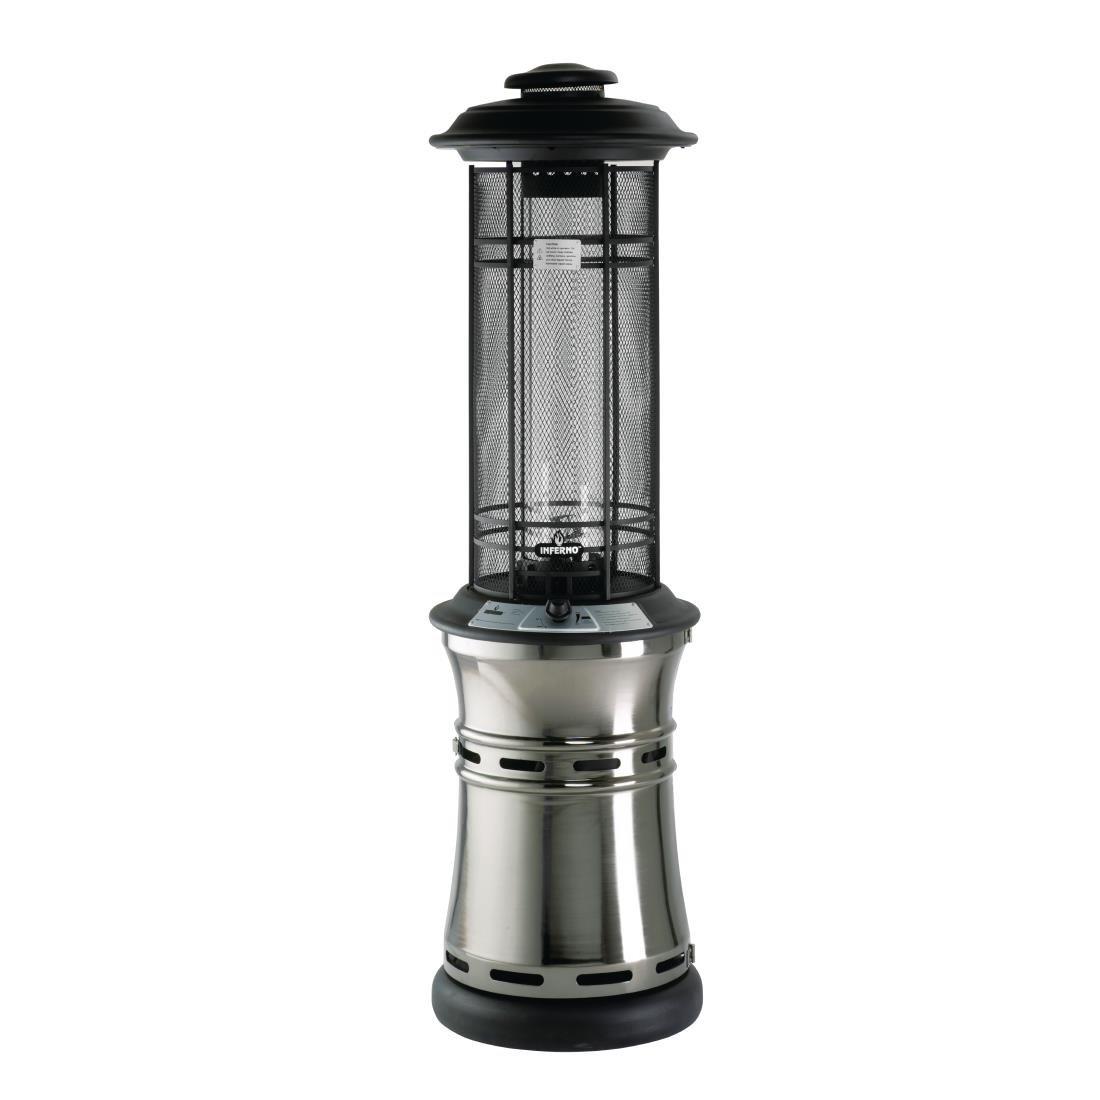 Lifestyle Inferno Flame Patio Heater 11kW - Each - CP442 - 1